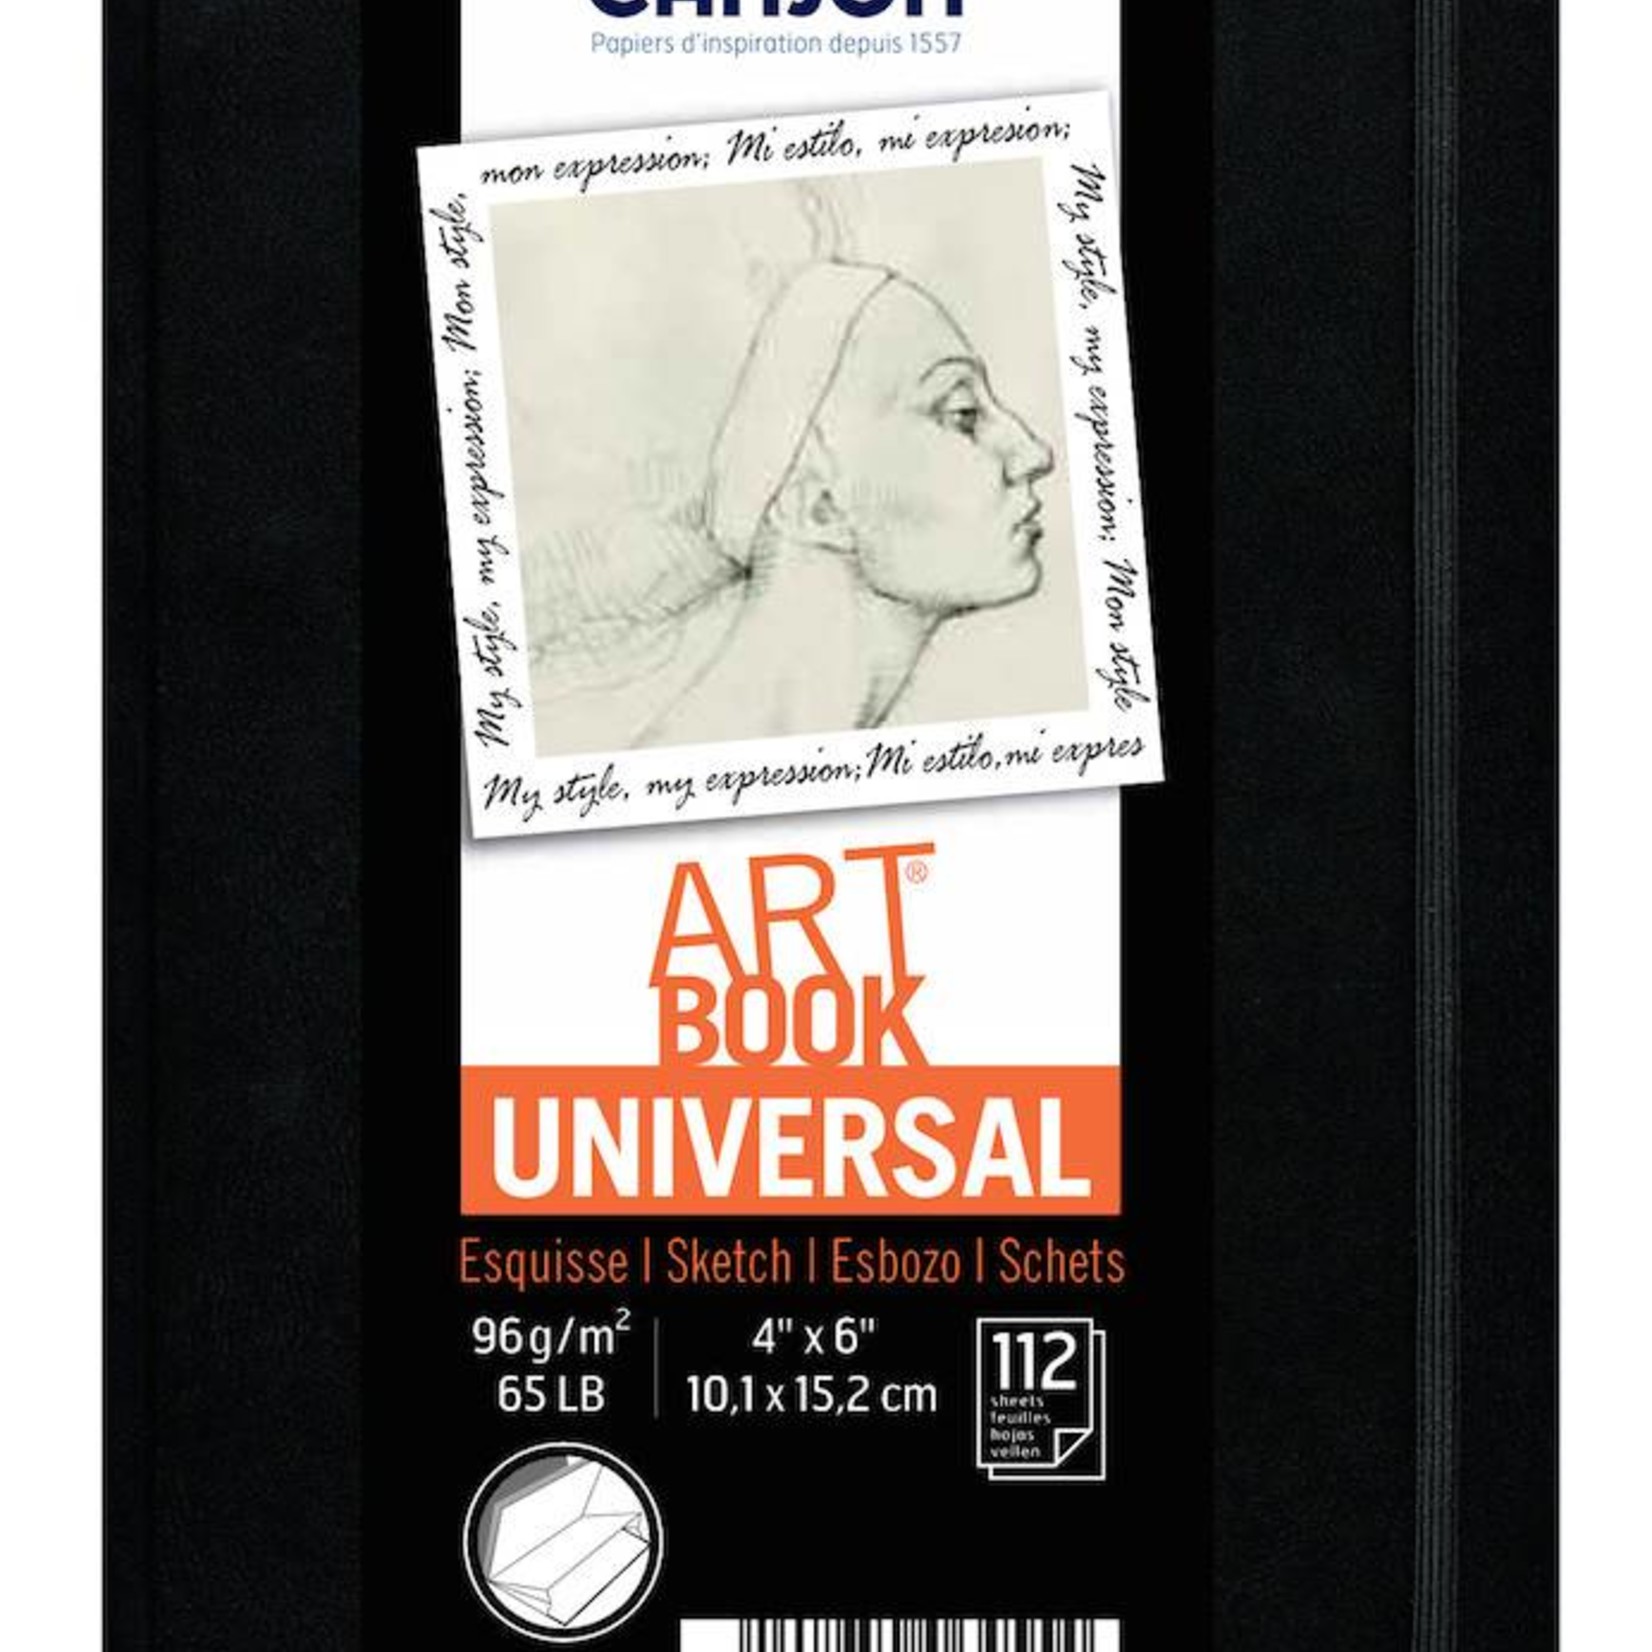 CANSON CANSON UNIVERSAL ART BOOK 4X6 65LB  112/SHT    CAN-200006455